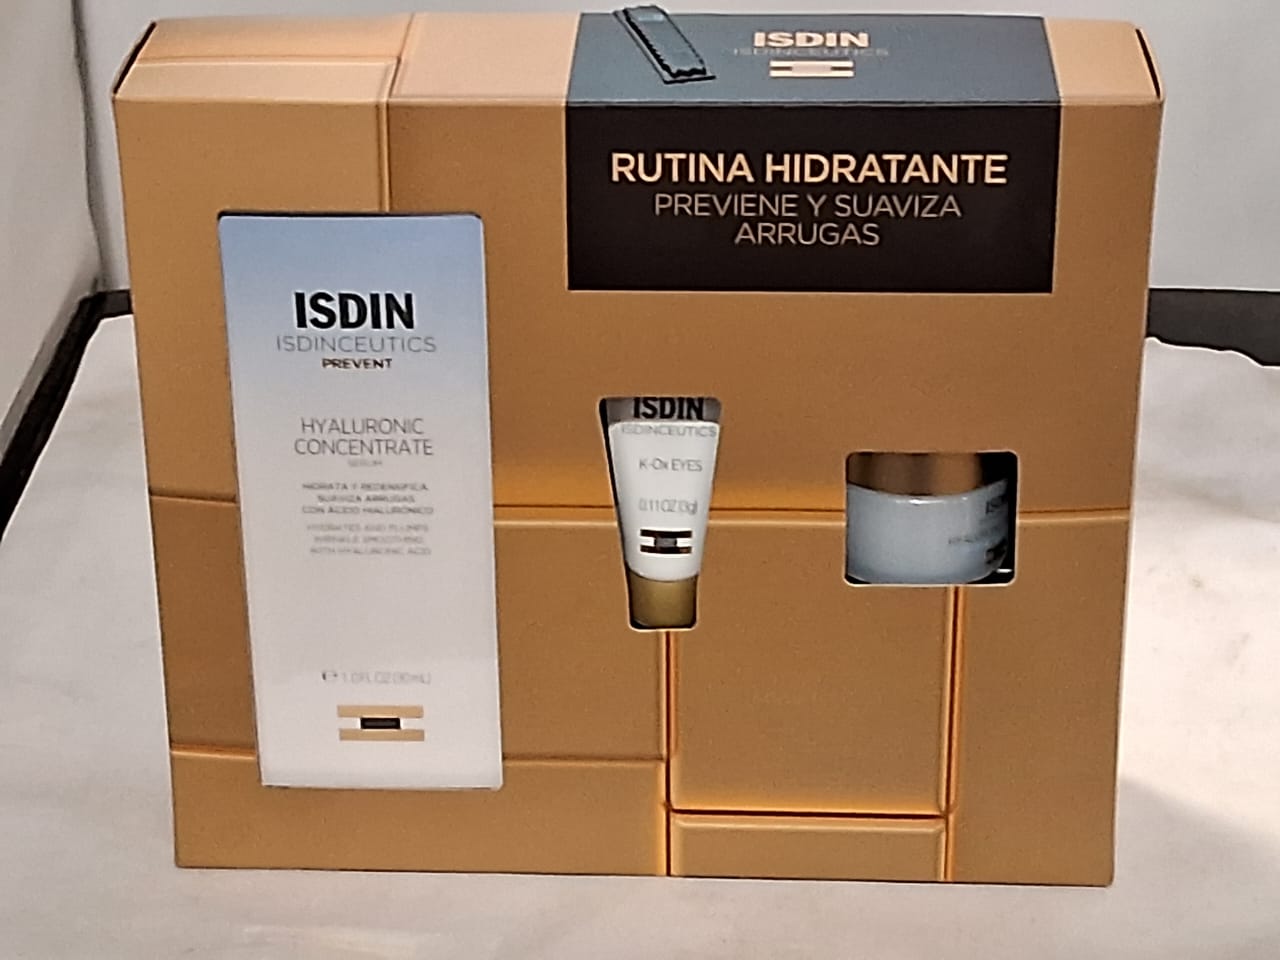 Pack isdin rutina hidratante hyaluronic concentrate + k-ox eyes + hyaluronic moisture [Openbox]